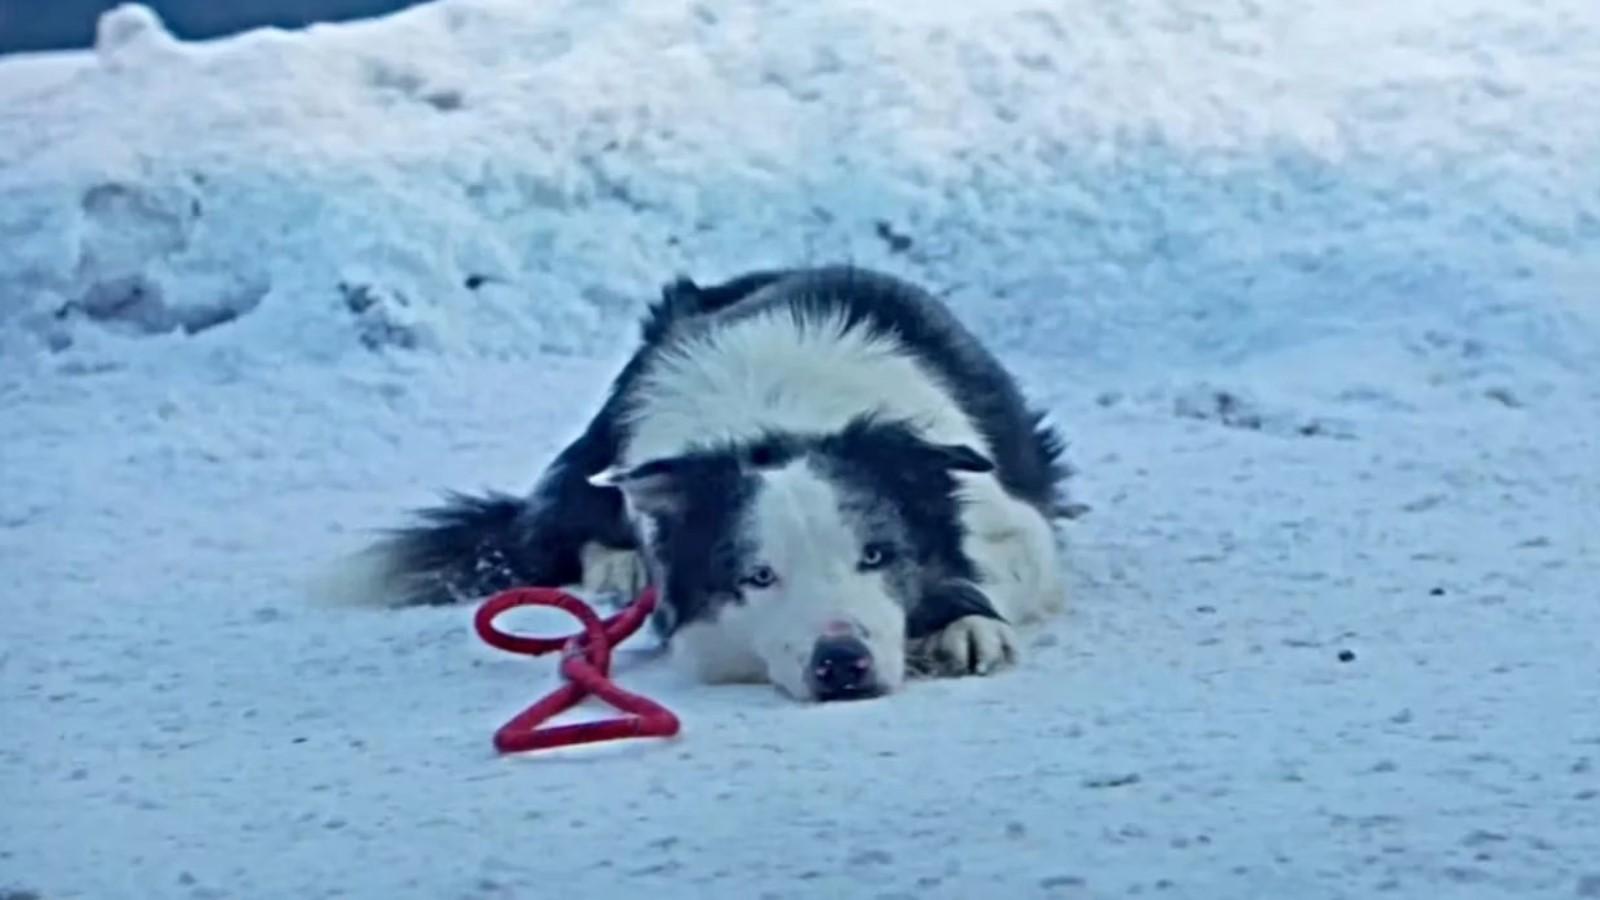 Messi the Dog in Anatomy of a Fall, laying on the snow